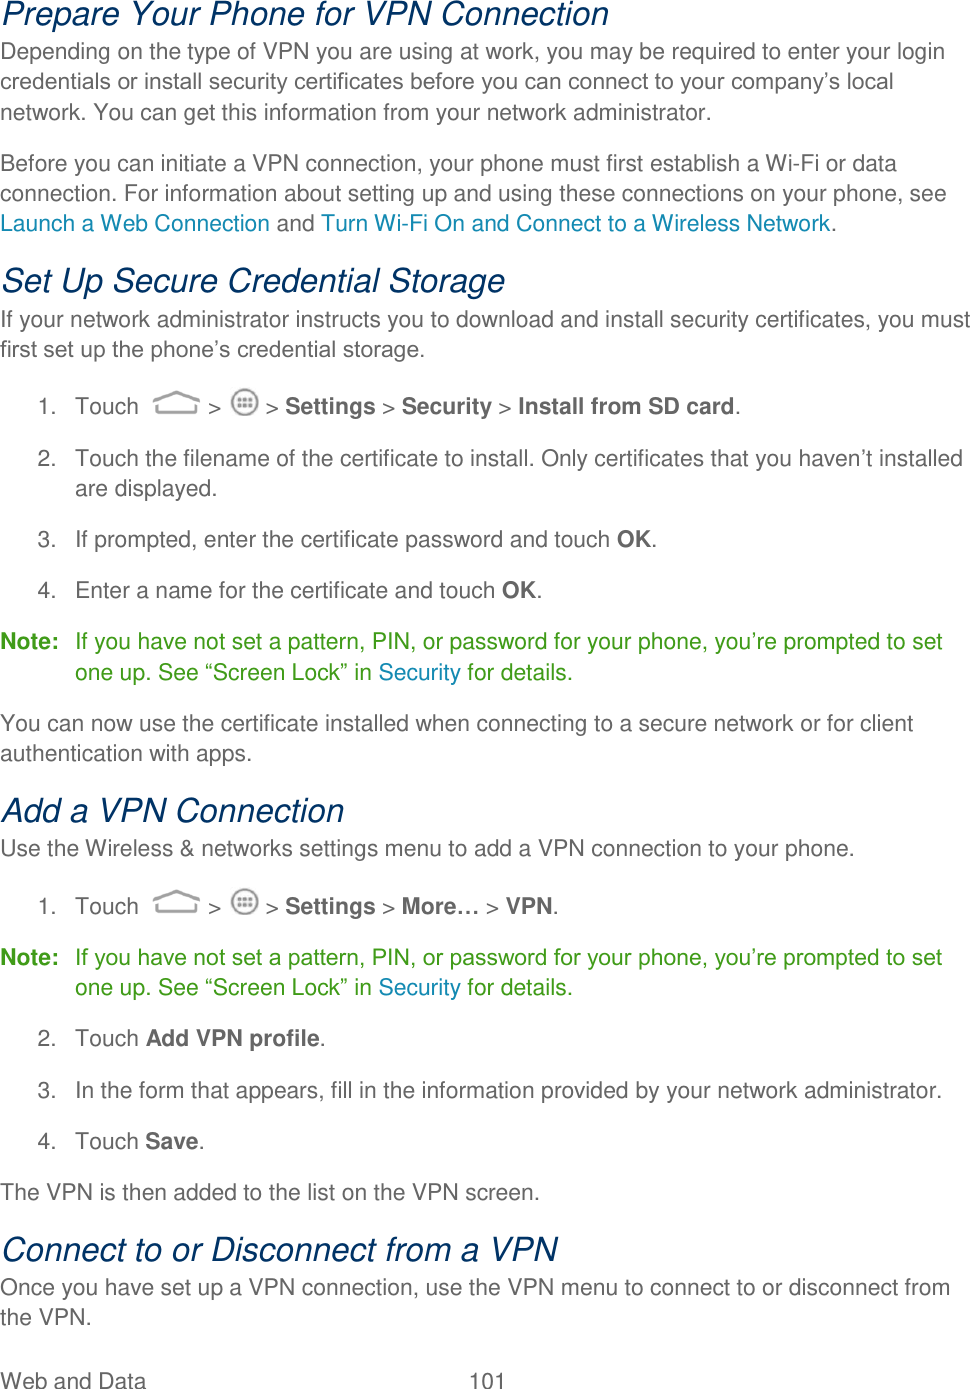 Web and Data  101   Prepare Your Phone for VPN Connection Depending on the type of VPN you are using at work, you may be required to enter your login credentials or install security certificates before you can connect to your company‟s local network. You can get this information from your network administrator. Before you can initiate a VPN connection, your phone must first establish a Wi-Fi or data connection. For information about setting up and using these connections on your phone, see Launch a Web Connection and Turn Wi-Fi On and Connect to a Wireless Network. Set Up Secure Credential Storage If your network administrator instructs you to download and install security certificates, you must first set up the phone‟s credential storage. 1.  Touch   &gt;   &gt; Settings &gt; Security &gt; Install from SD card. 2.  Touch the filename of the certificate to install. Only certificates that you haven‟t installed are displayed. 3.  If prompted, enter the certificate password and touch OK. 4.  Enter a name for the certificate and touch OK. Note:  If you have not set a pattern, PIN, or password for your phone, you‟re prompted to set one up. See “Screen Lock” in Security for details. You can now use the certificate installed when connecting to a secure network or for client authentication with apps. Add a VPN Connection Use the Wireless &amp; networks settings menu to add a VPN connection to your phone. 1.  Touch   &gt;   &gt; Settings &gt; More… &gt; VPN. Note:   If you have not set a pattern, PIN, or password for your phone, you‟re prompted to set one up. See “Screen Lock” in Security for details. 2.  Touch Add VPN profile. 3.  In the form that appears, fill in the information provided by your network administrator. 4.  Touch Save. The VPN is then added to the list on the VPN screen. Connect to or Disconnect from a VPN Once you have set up a VPN connection, use the VPN menu to connect to or disconnect from the VPN. 